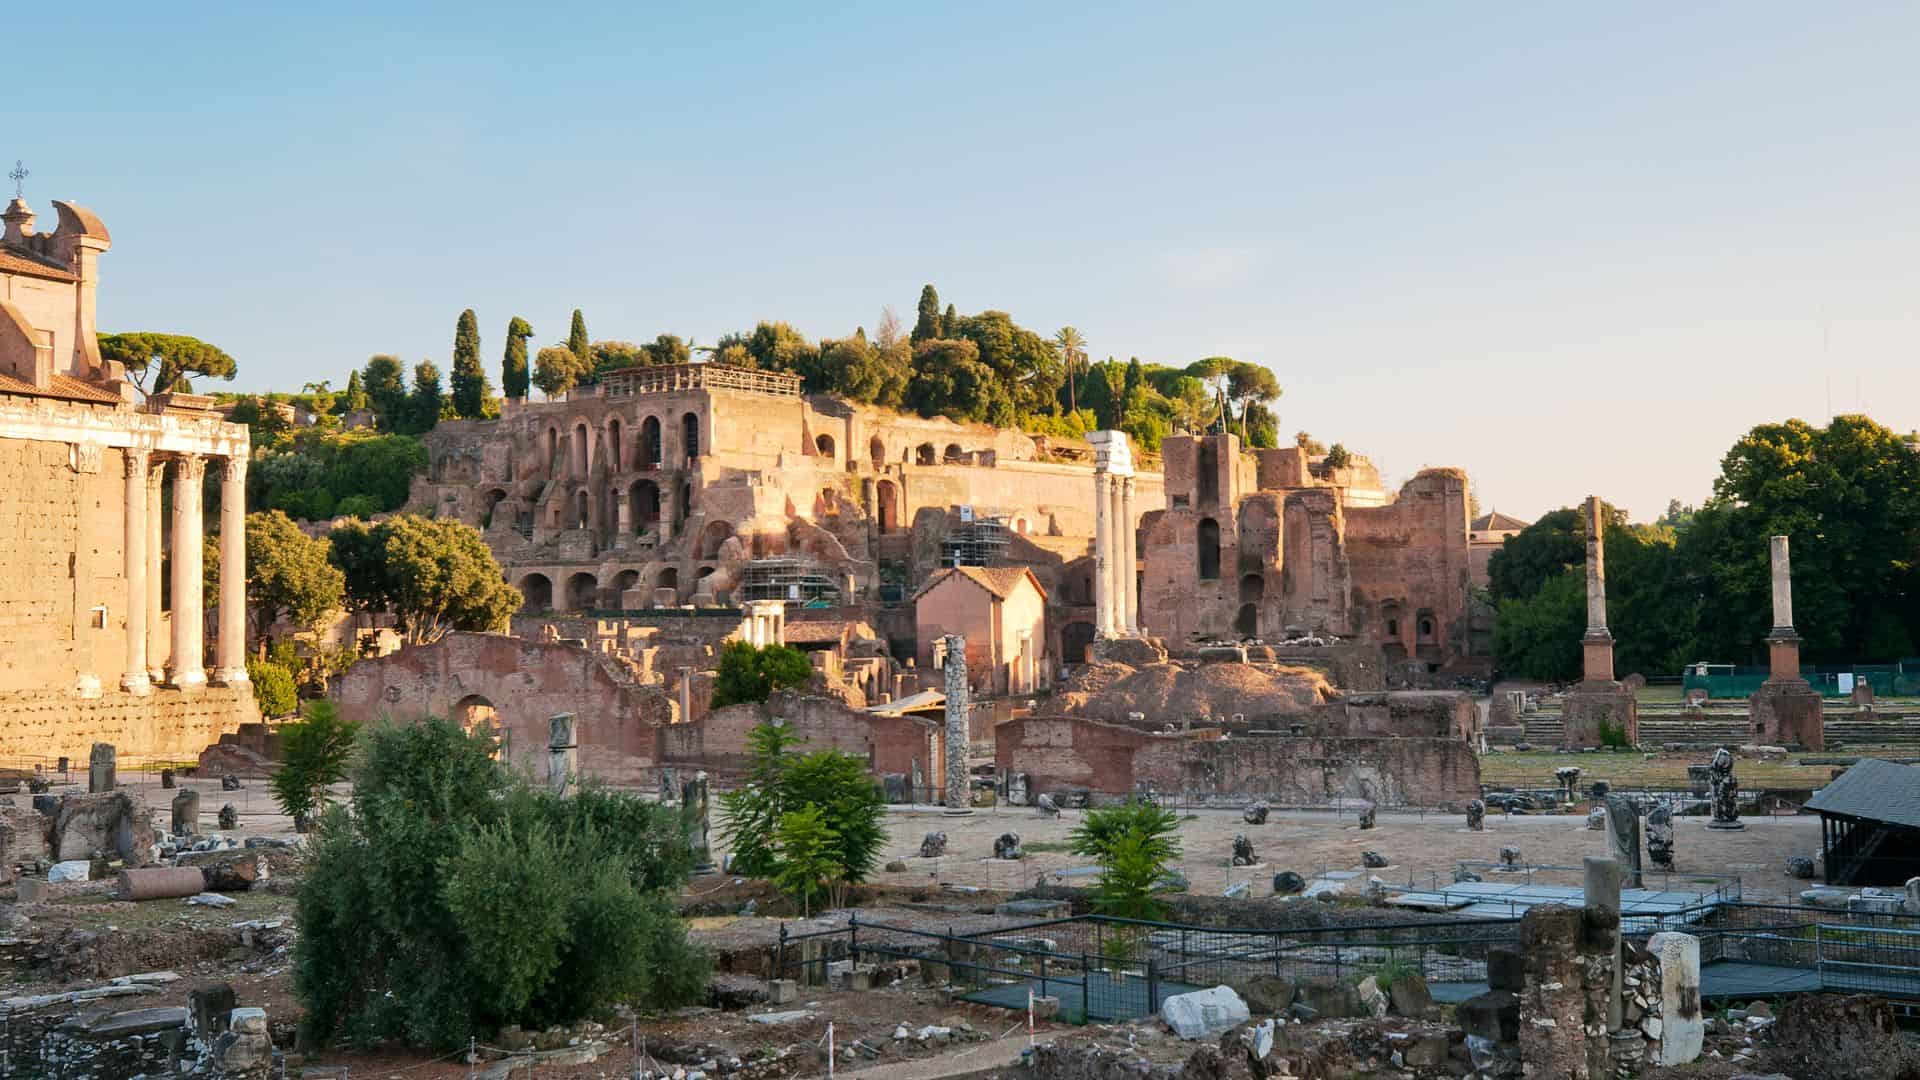 View of Palatine Hill in Rome